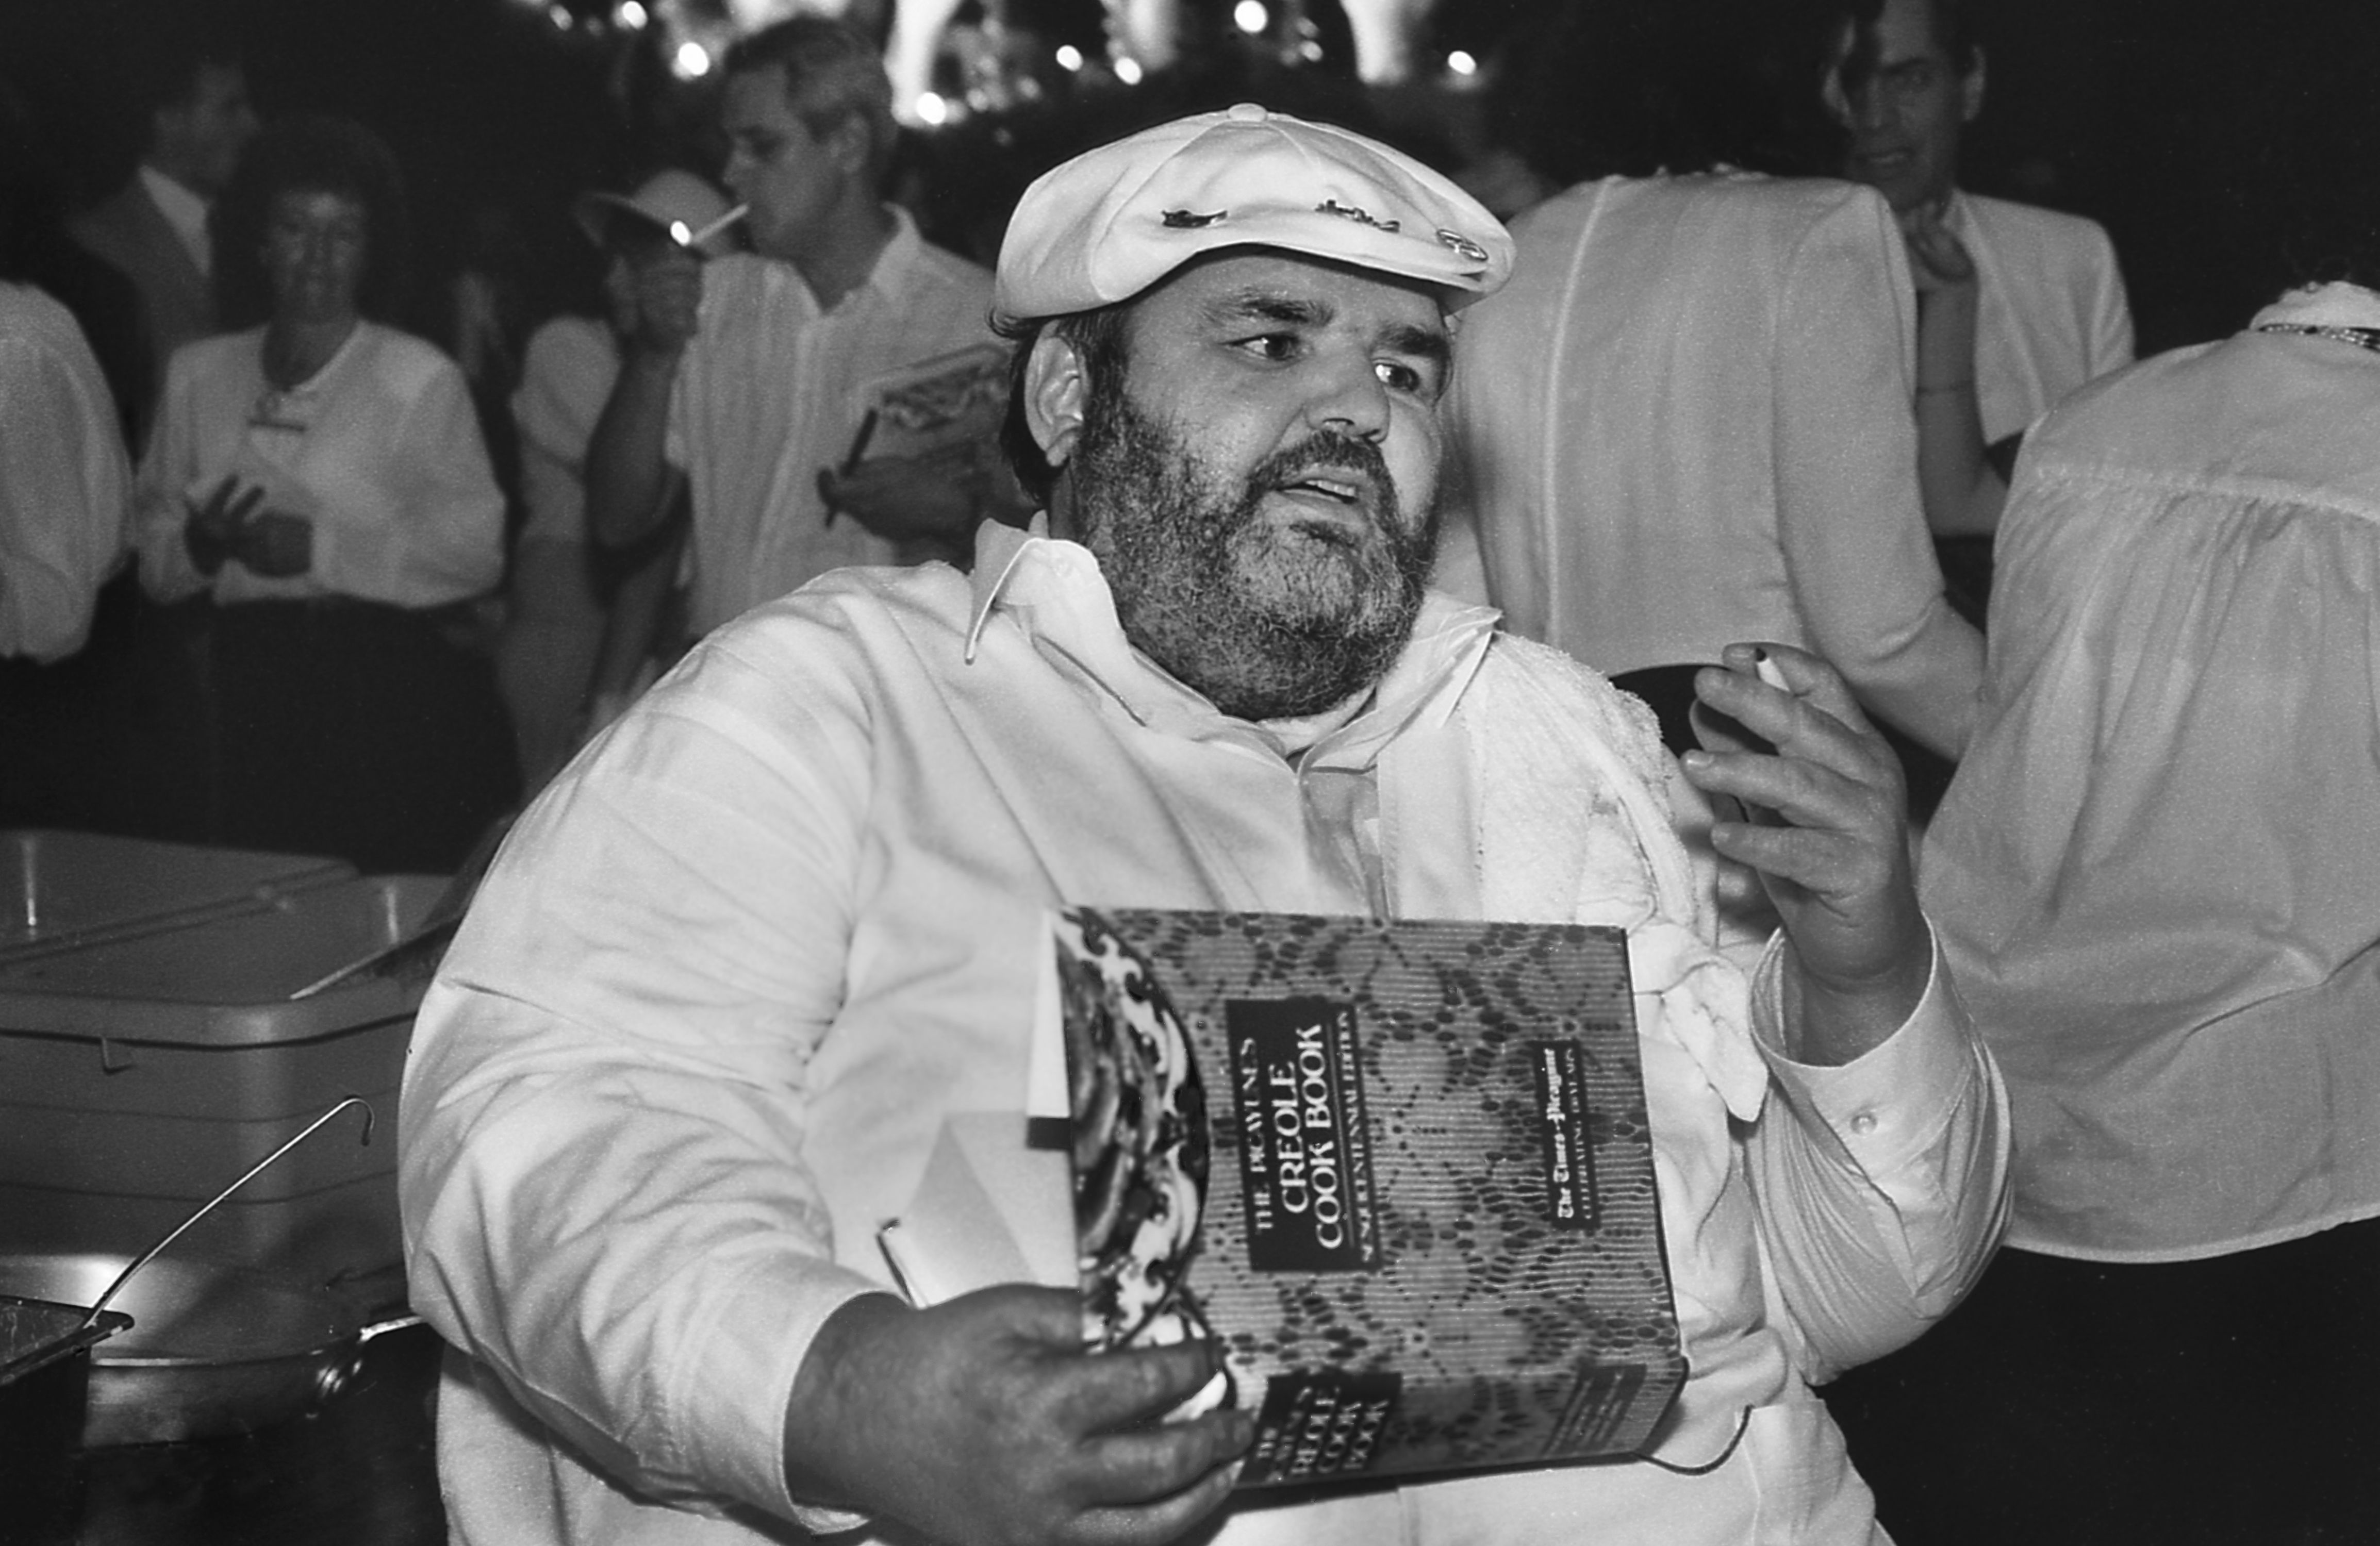 Photo shows chef Paul Prudhomme holding a cookbook at an event